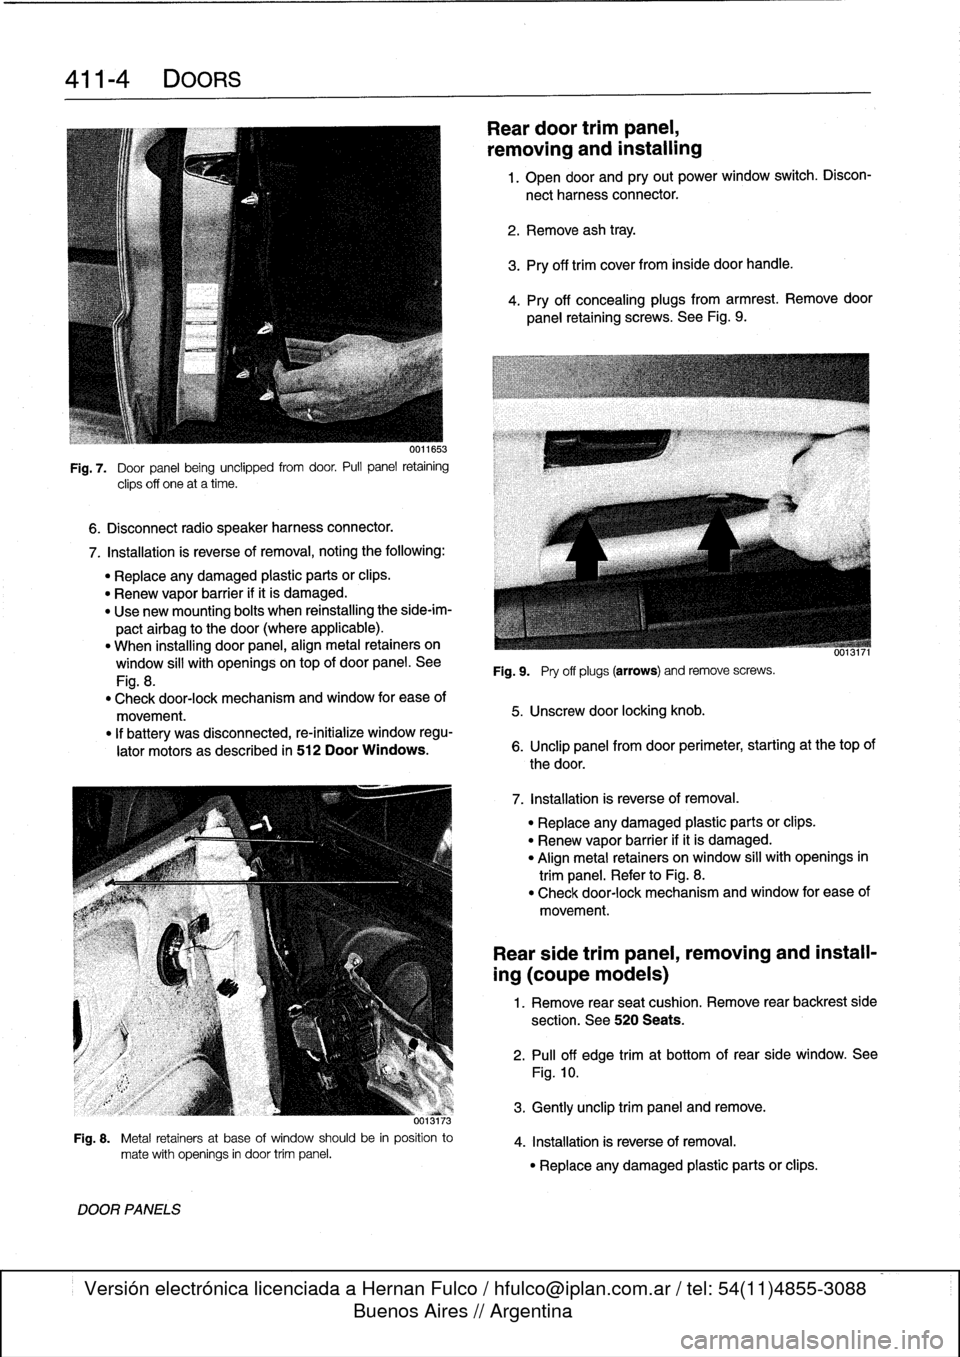 BMW 325i 1994 E36 User Guide 
411-
4
DOORS

6
.
Disconnect
radio
speaker
harness
connector
.

Fig
.
7
.

	

Door
panel
being
unclipped
from
door
.
Pull
panel
retaining

clips
off
one
at
a
time
.

7
.
Installation
is
reverse
of
re